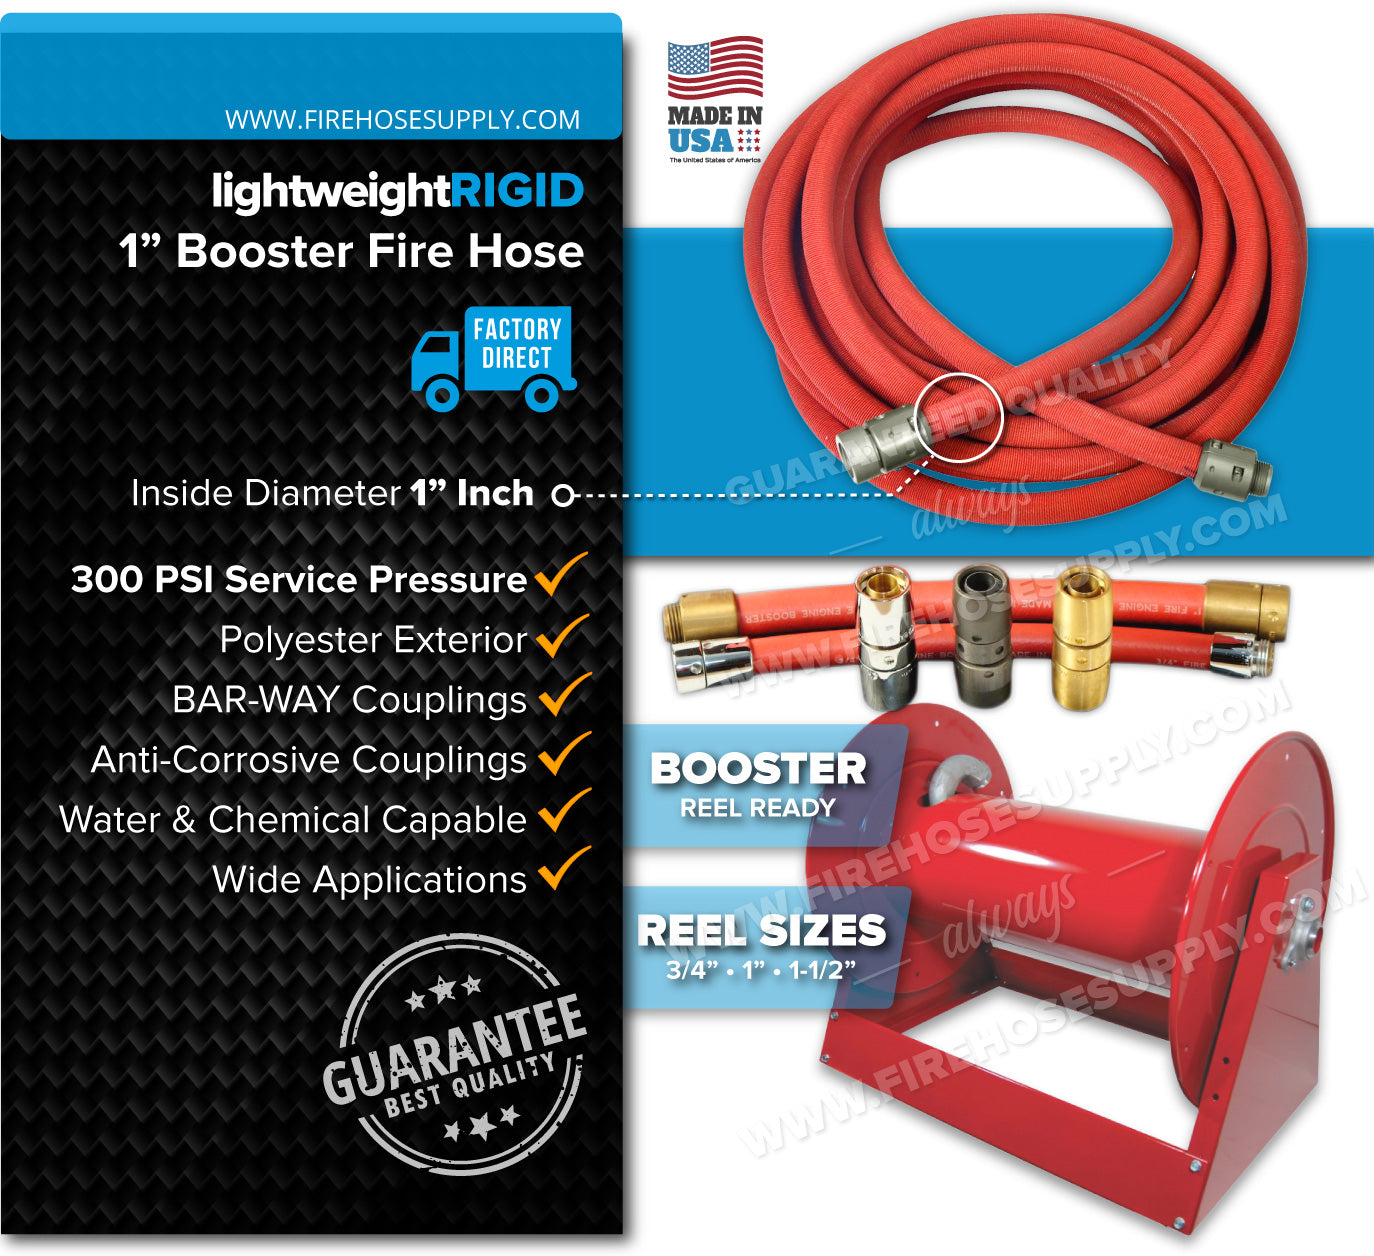 1 Inch Booster Fire Hose Aluminum Threads Couplings Overview 300 PSI